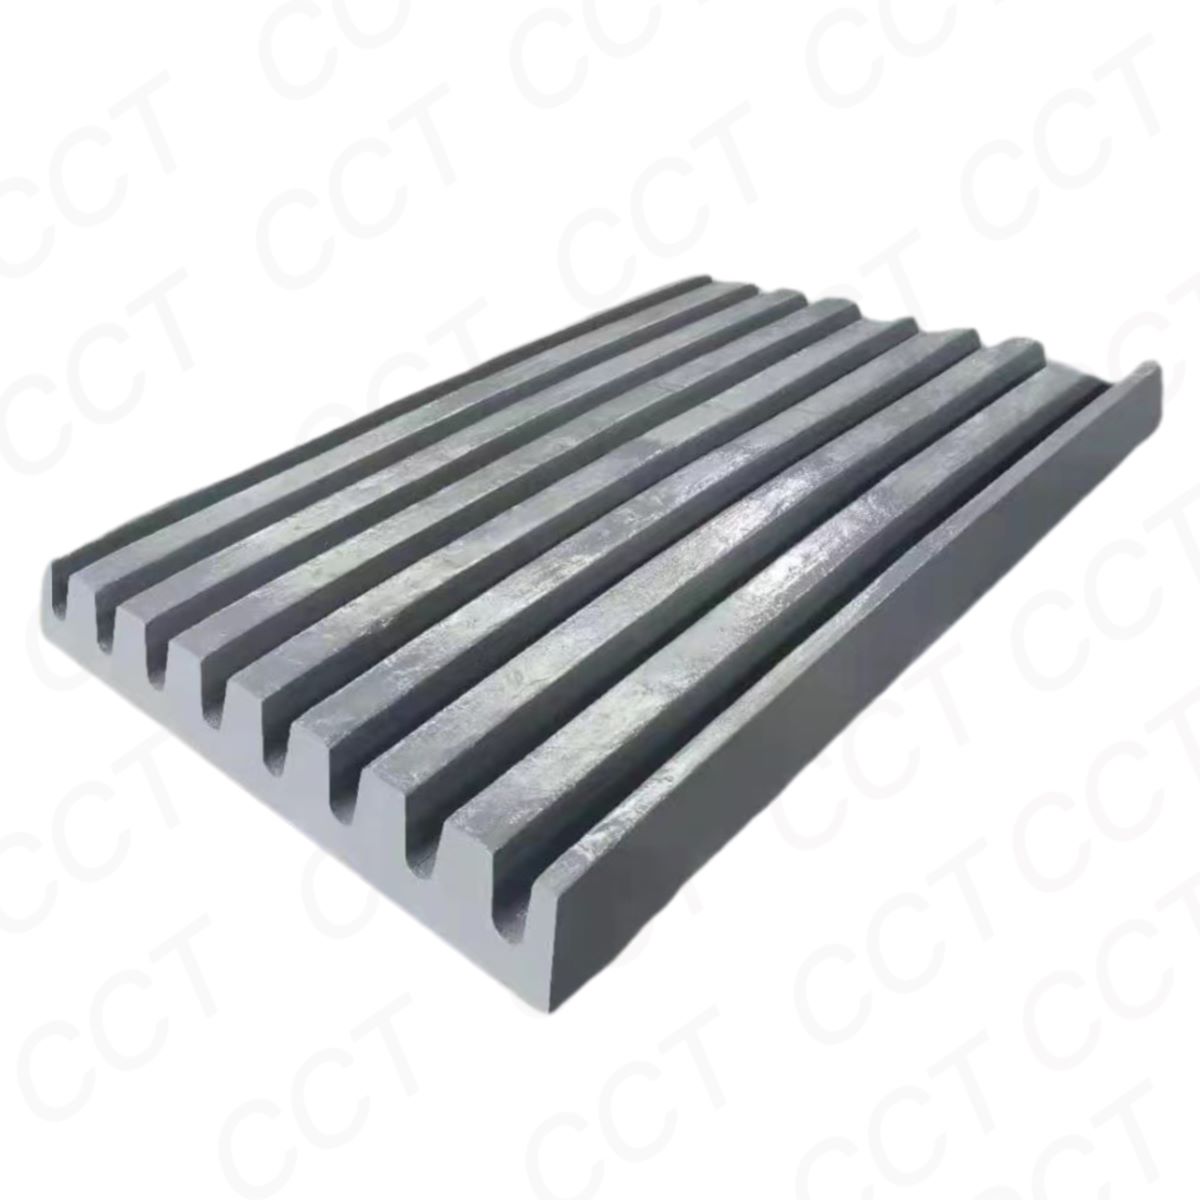 Jaw Plate CT-0009